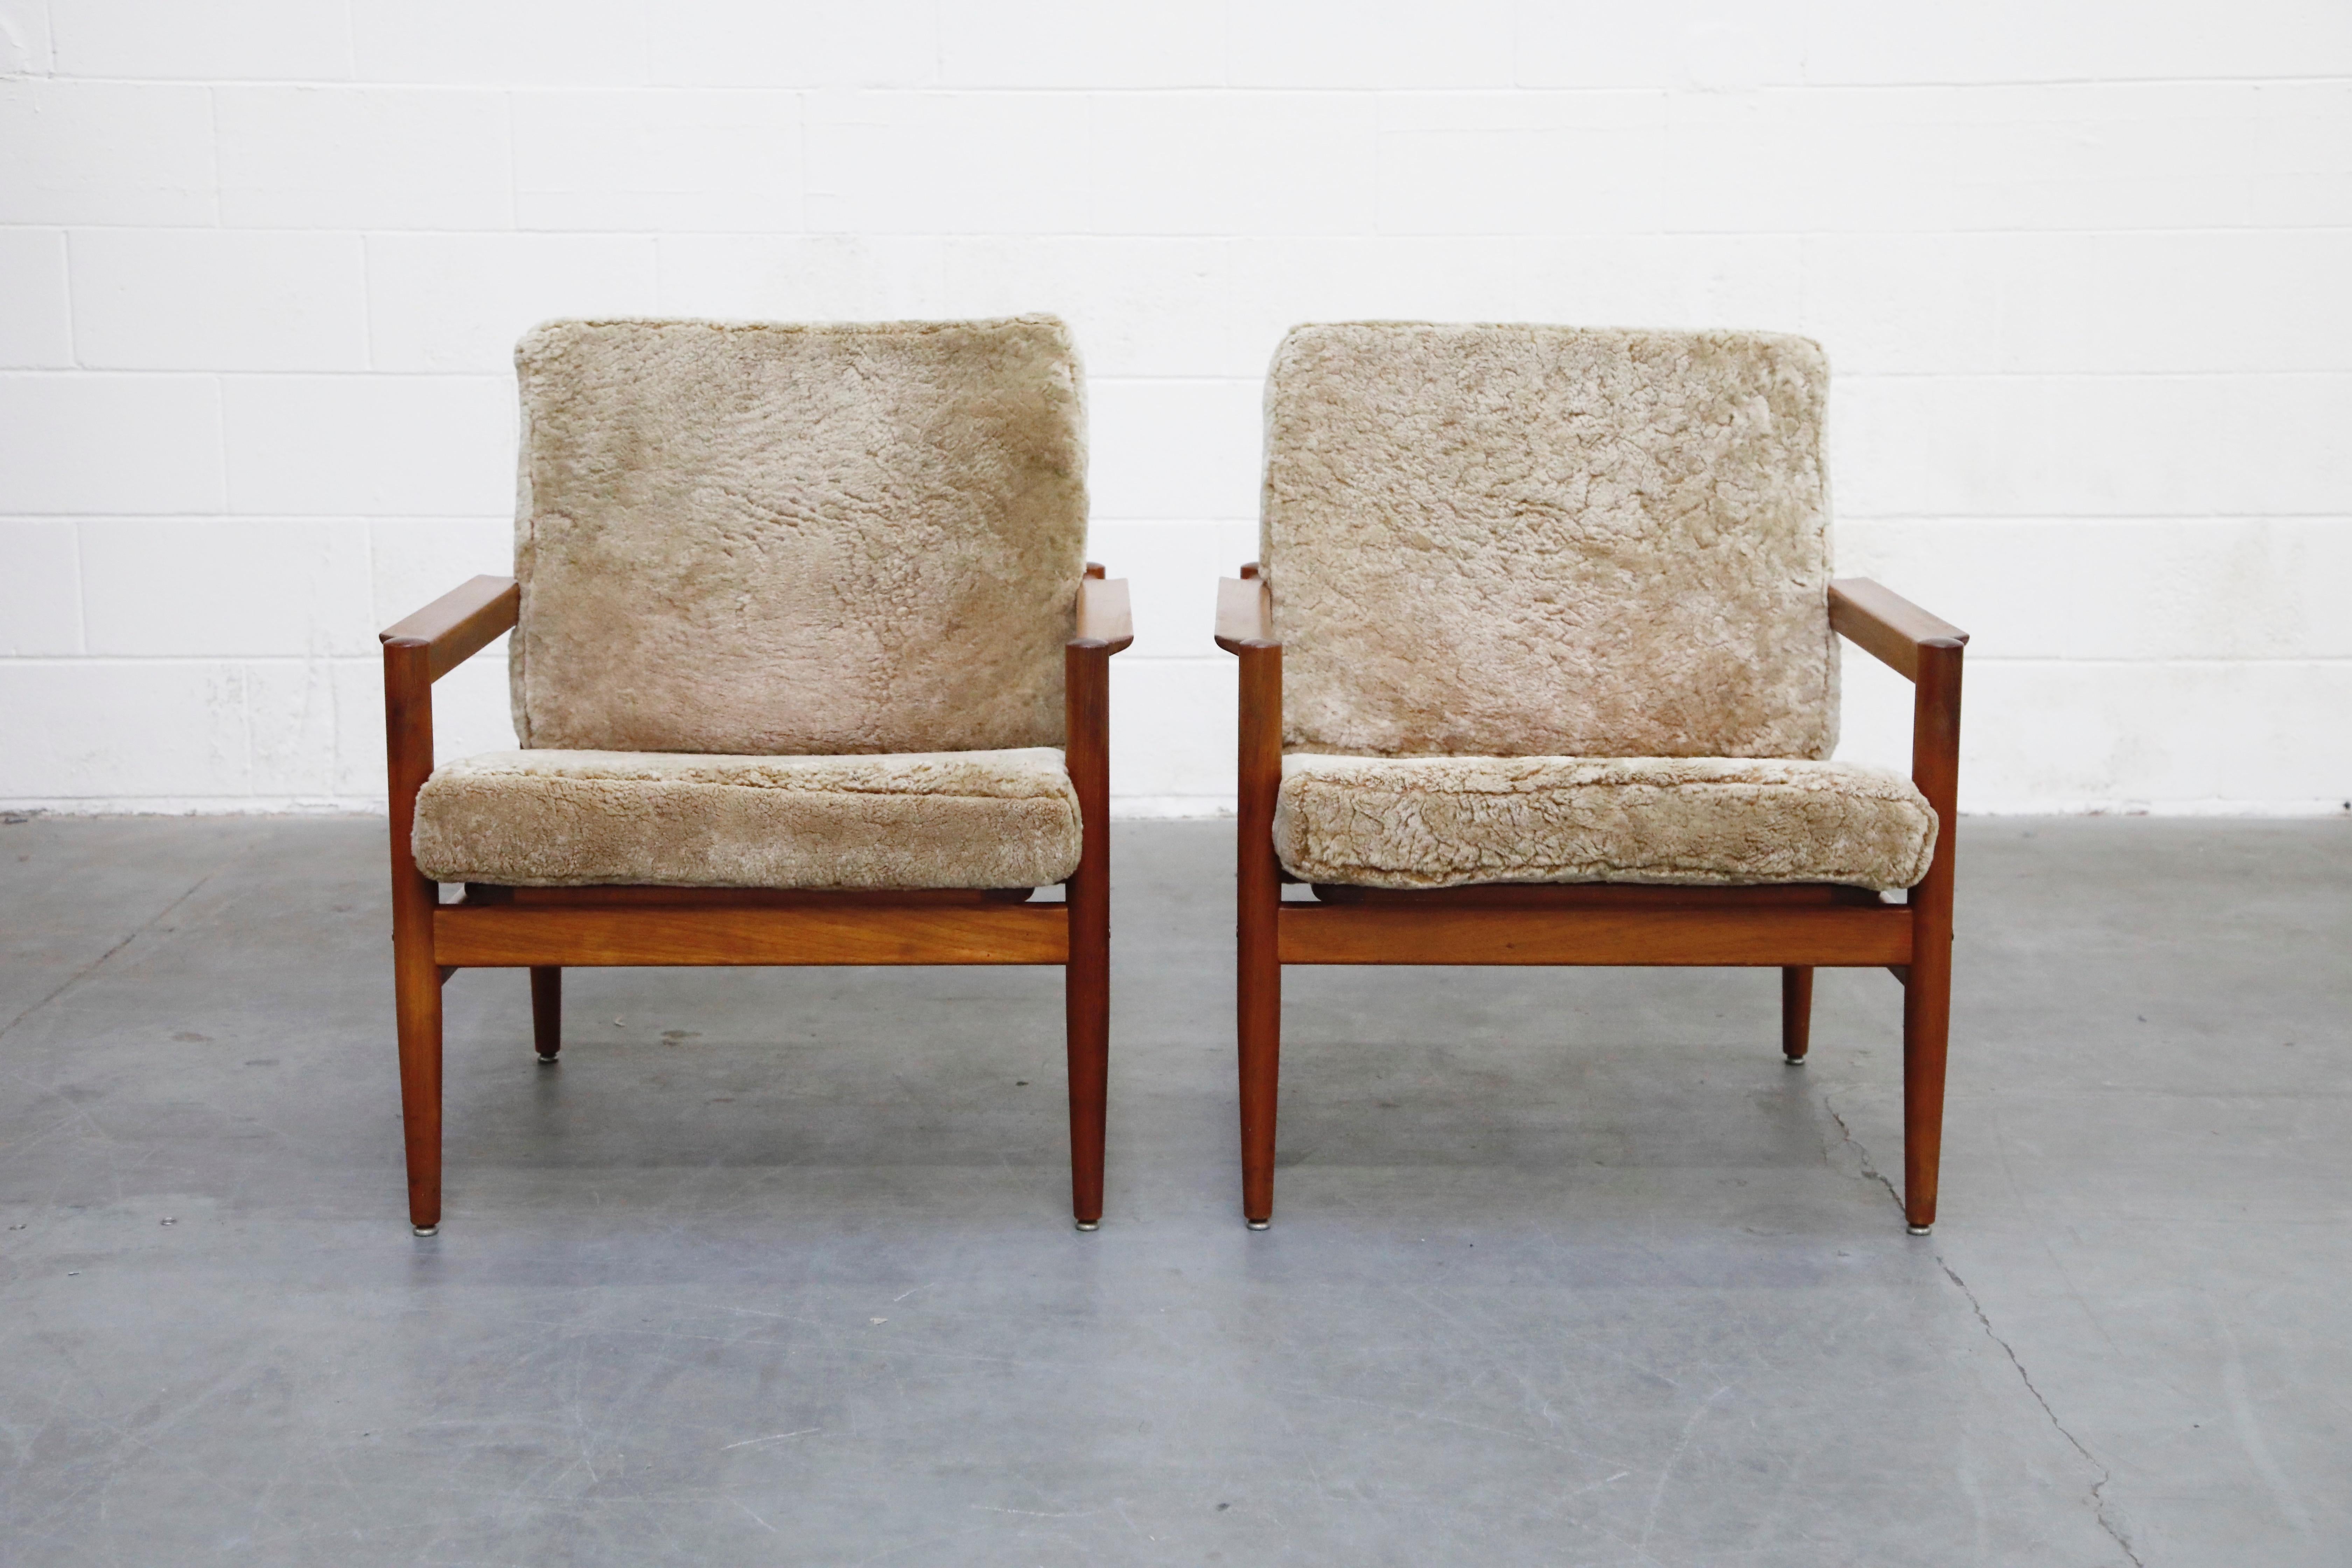 Mid-Century Modern Teak and Shearling Fur Lounge Chairs by Børge Jensen & Sønner, 1960s, Signed